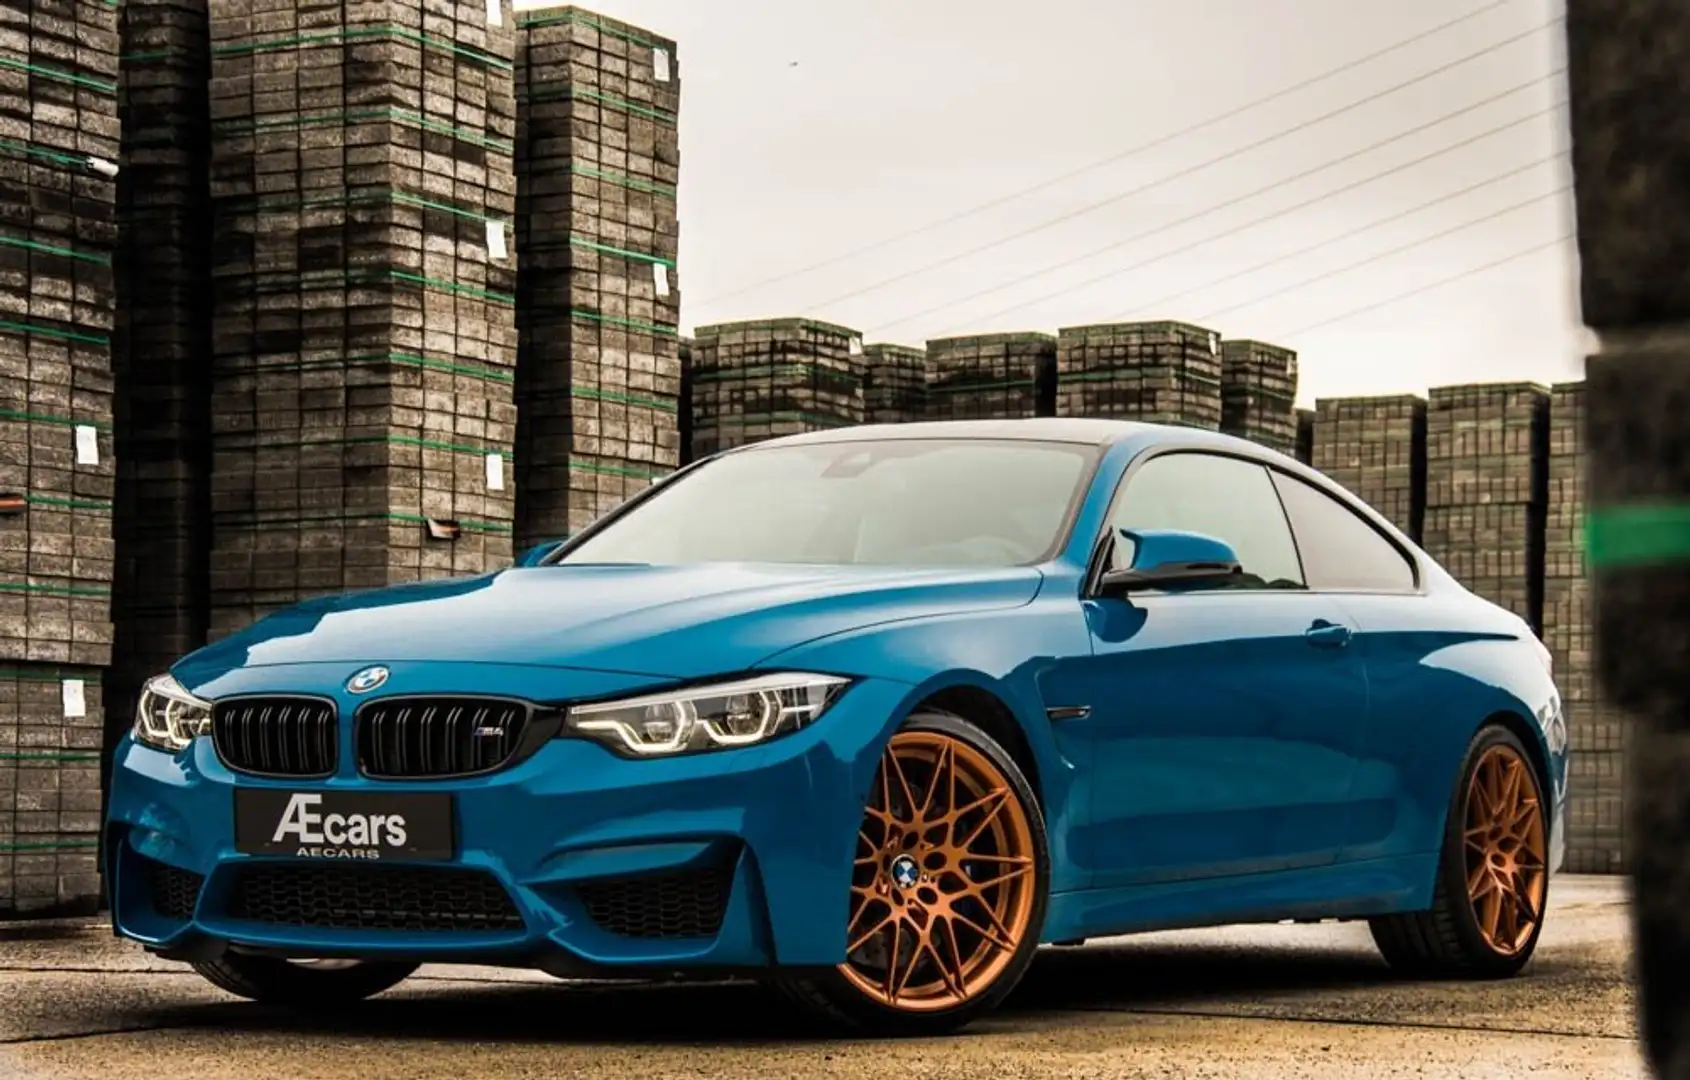 BMW M4 *** COMPETITION HERITAGE / LIMITED 1 OF 750 *** plava - 1